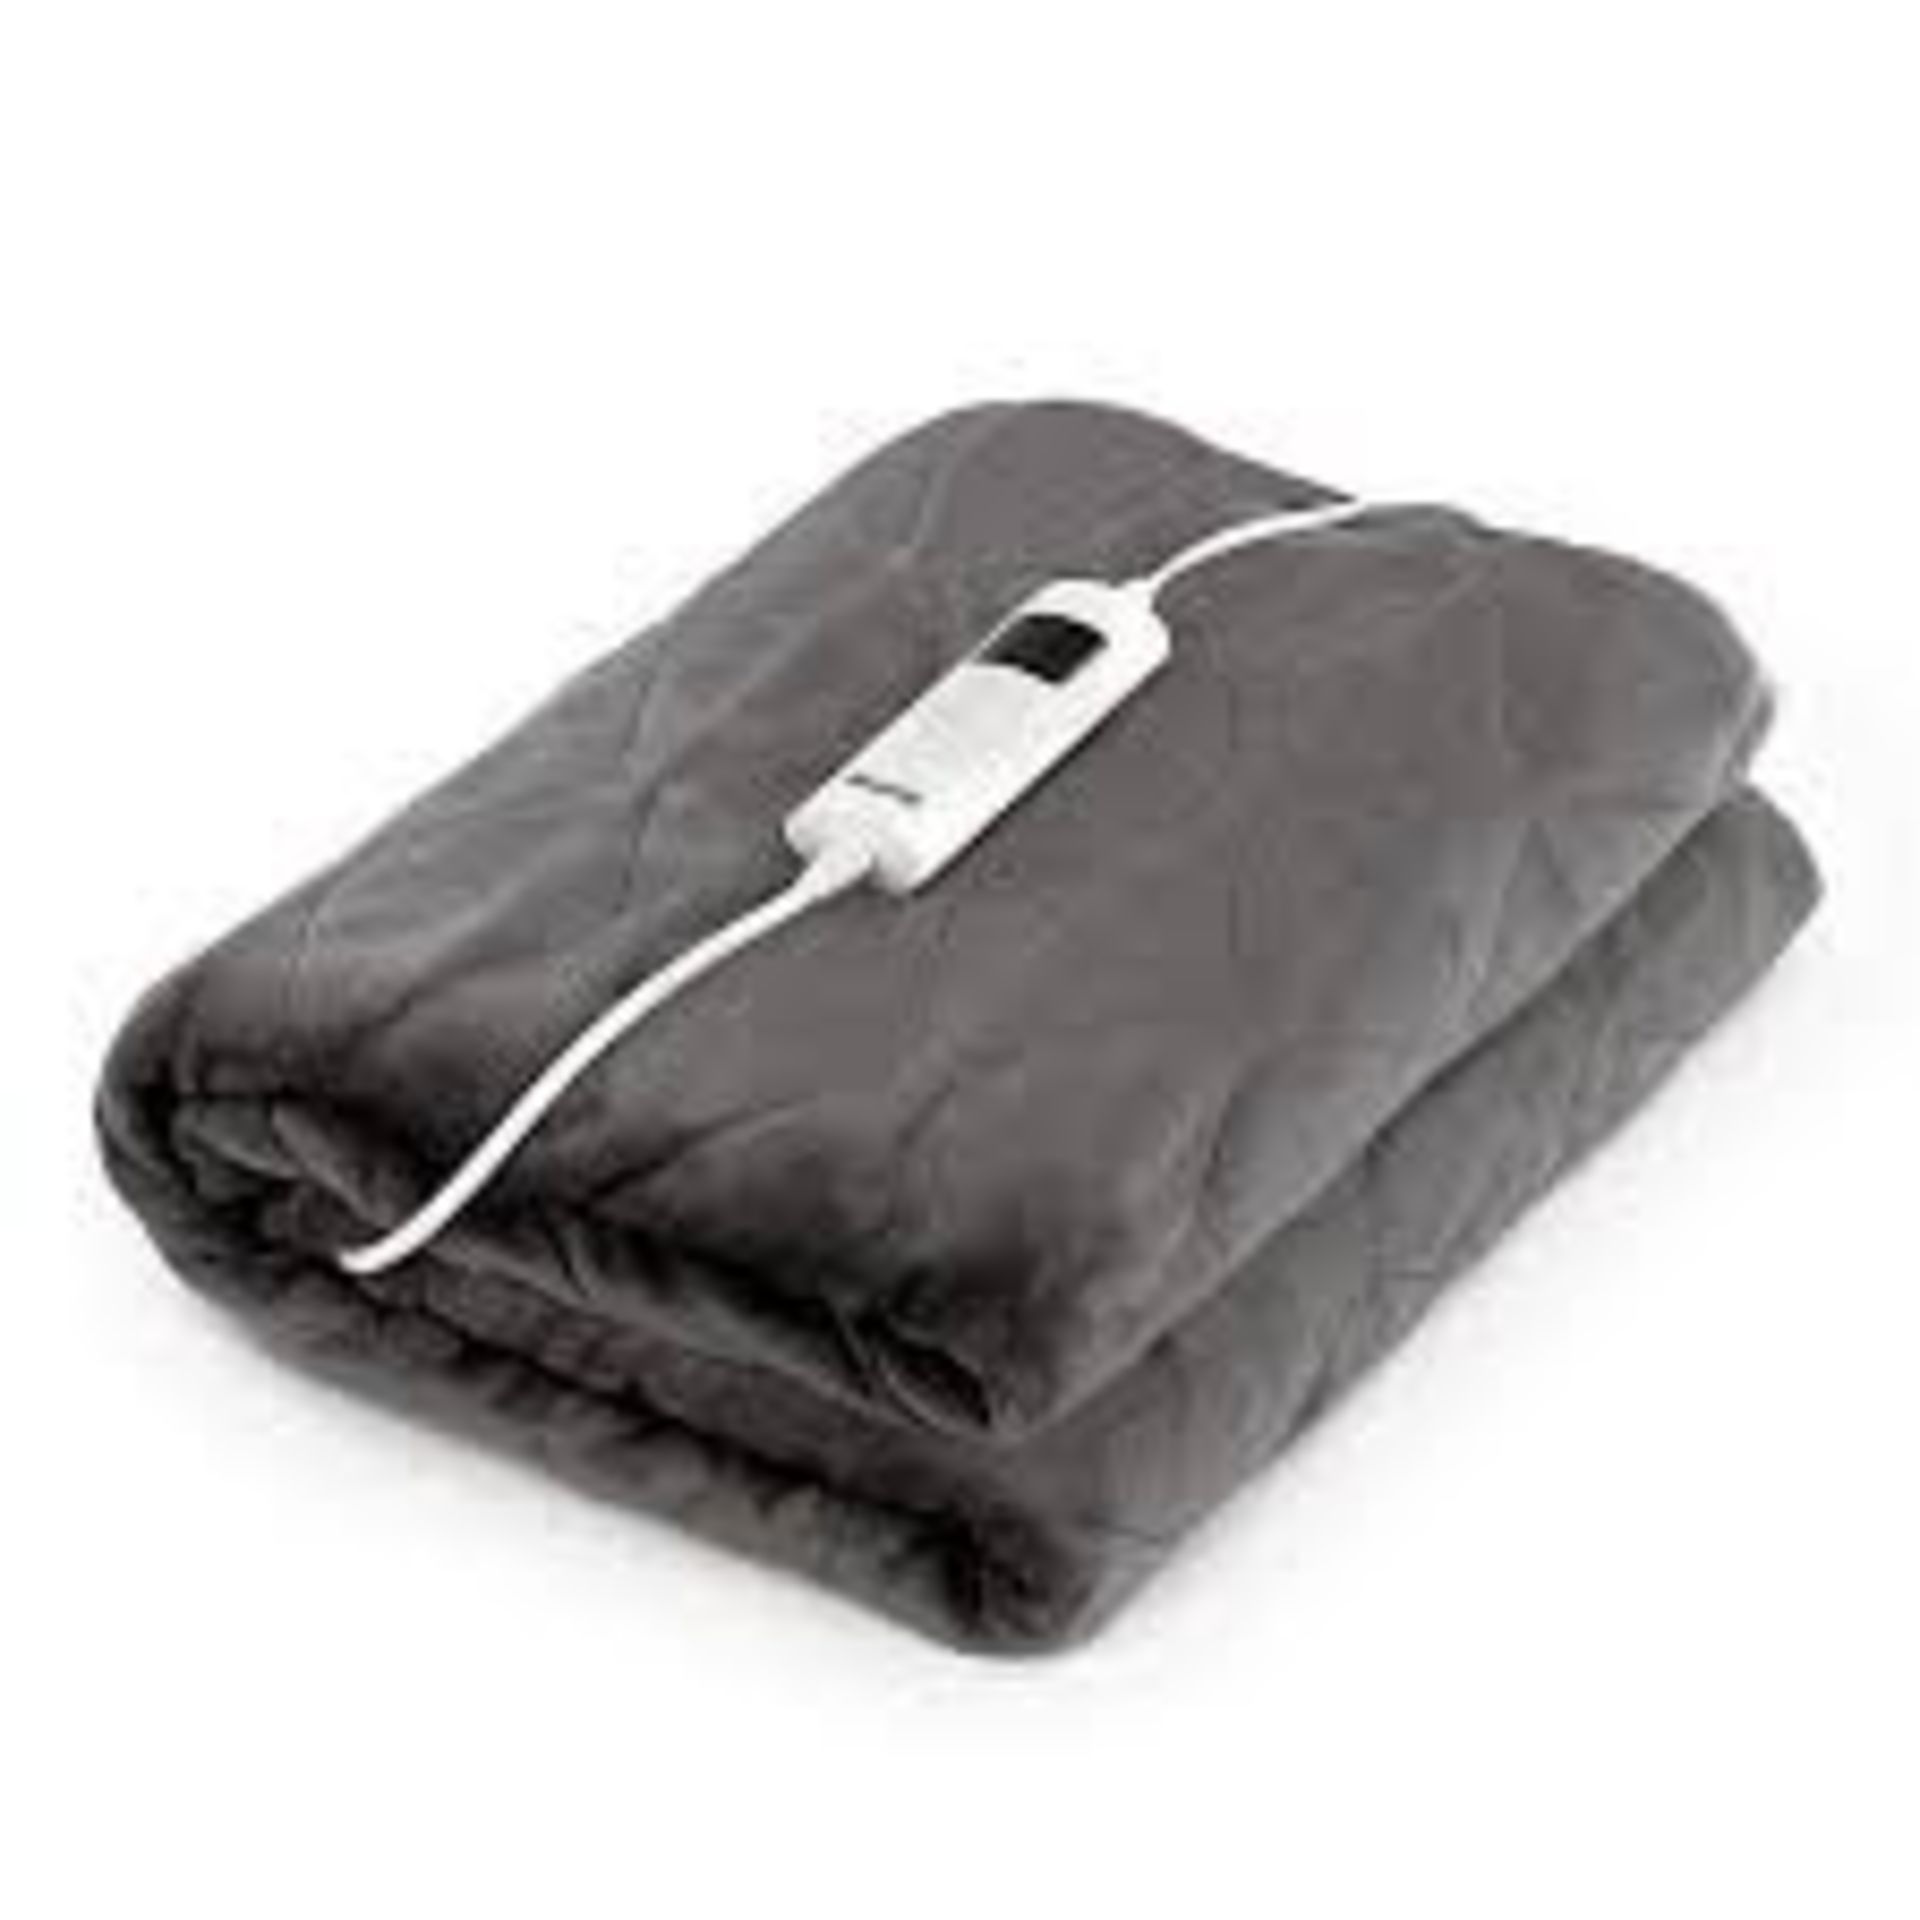 FiNeWaY Electric Heated Blanket - Large Cosy Warm Overthrow. - PW.